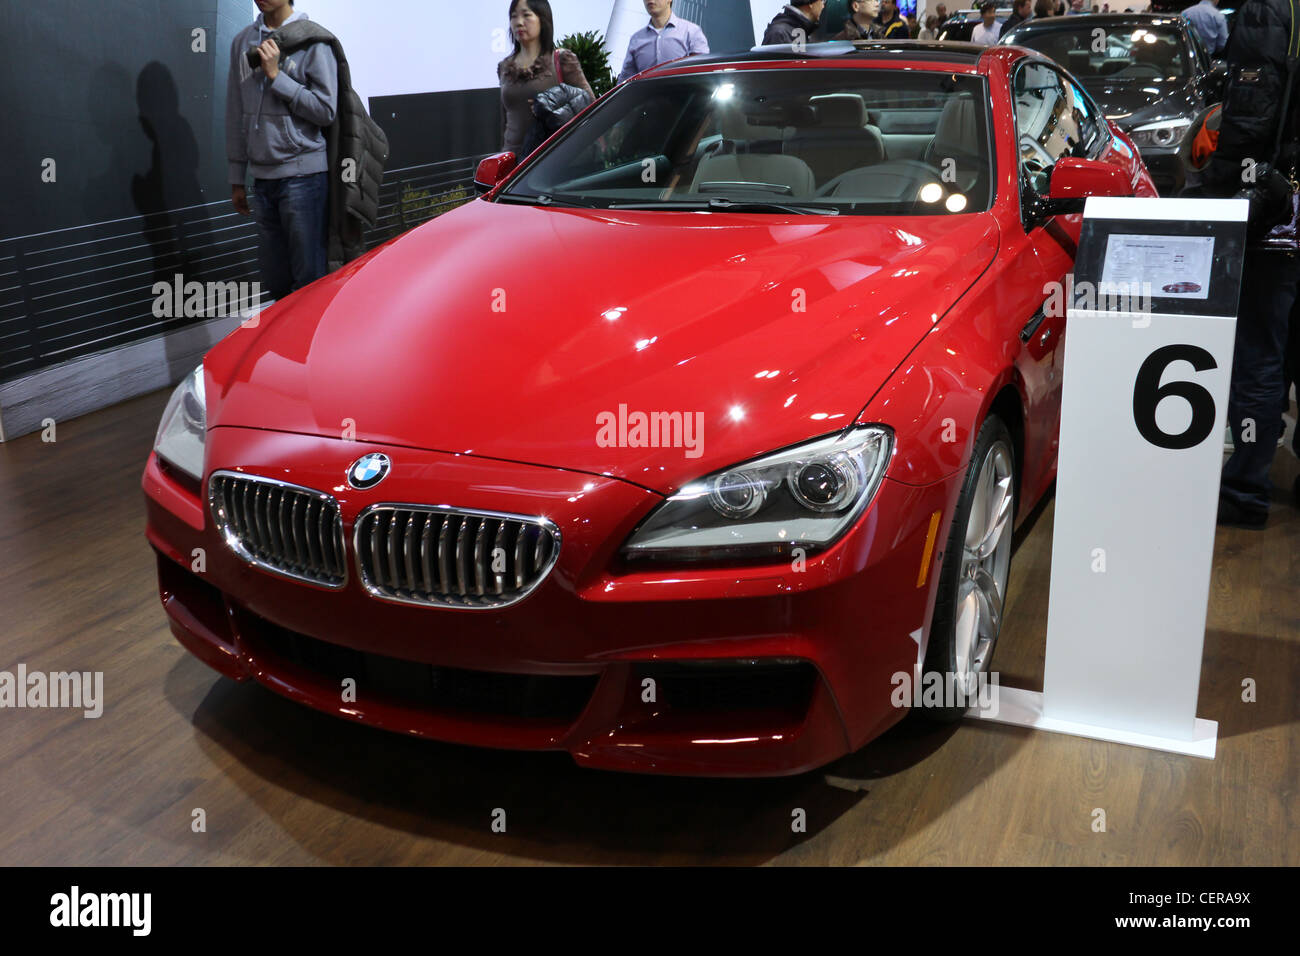 bmw 6 series red car Stock Photo